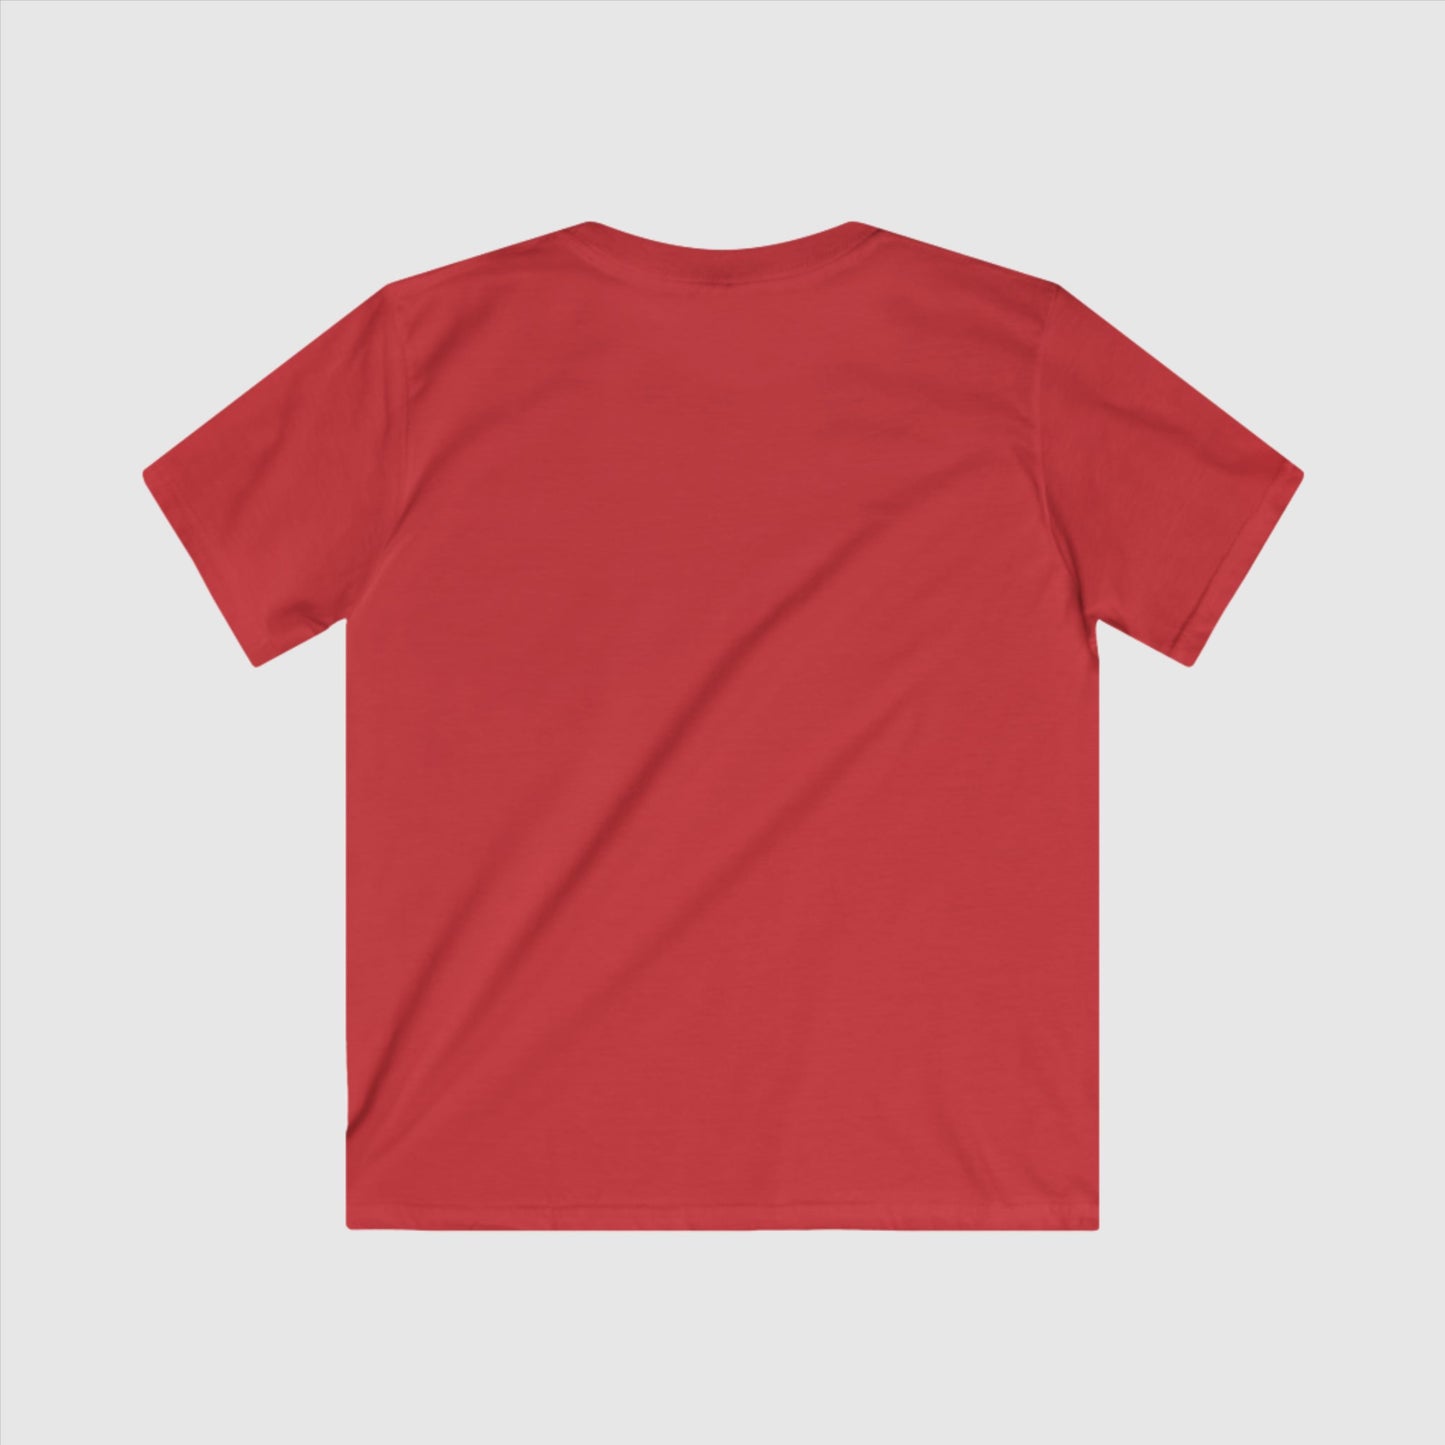 Kids Simple Blank Tee with Personalized Name and Icon Neck Label